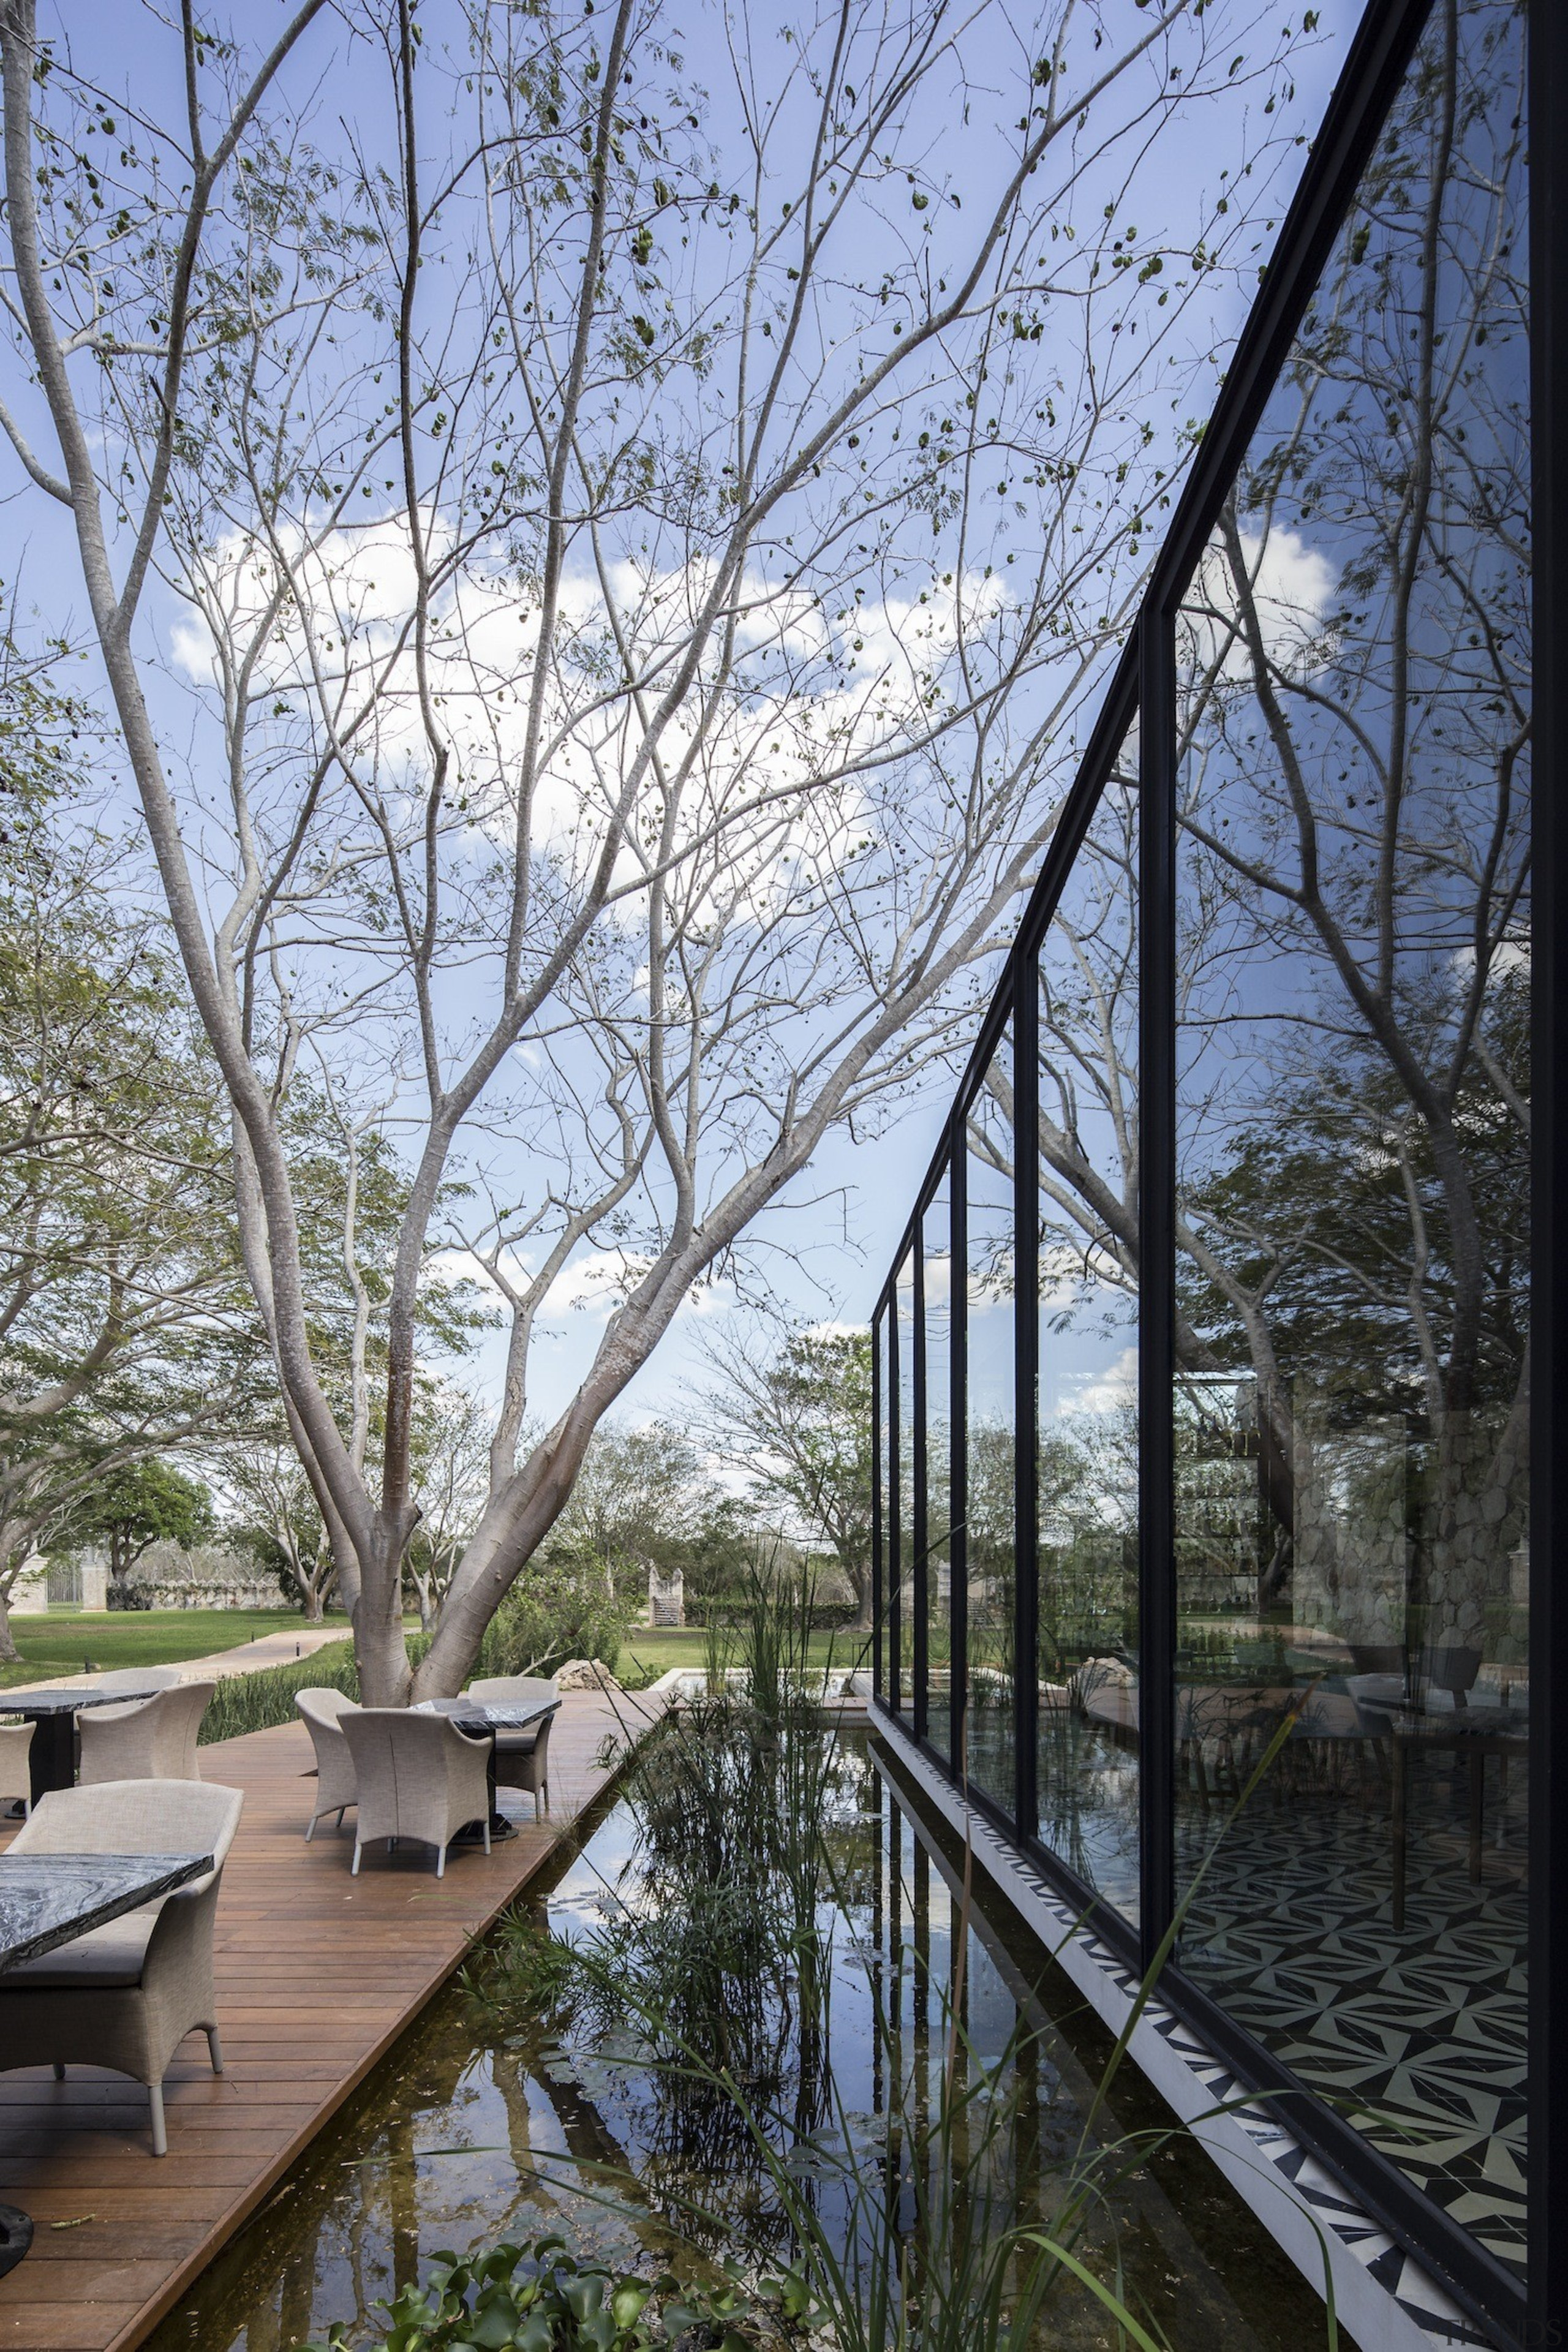  Architect: Central de Proyectos SCP architecture, branch, home, house, plant, real estate, reflection, tree, walkway, water, waterway, teal, black